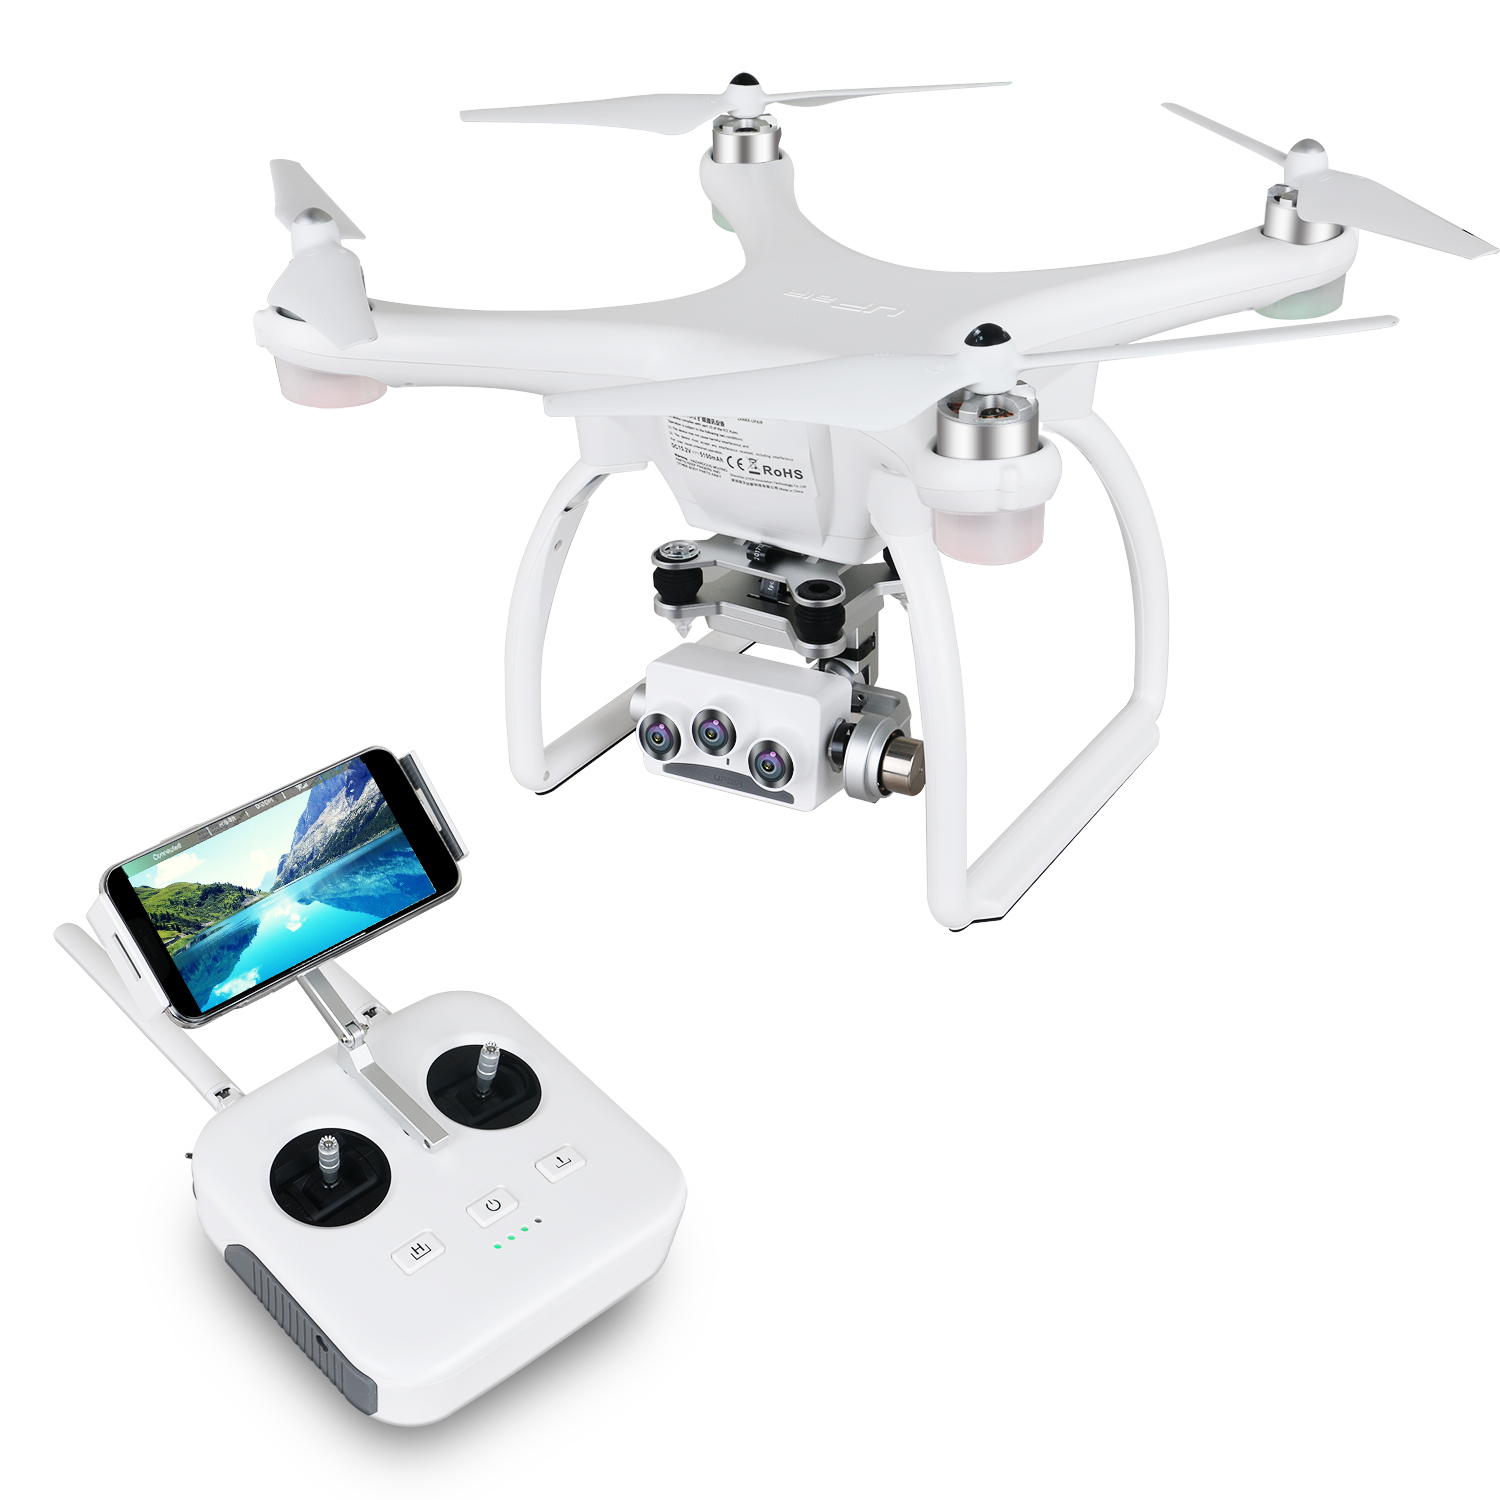 UPair 2 Ultrasonic 5.8G 1KM FPV 3D + 4K + 16MP Camera With 3 Axis Gimbal GPS RC Quadcopter Drone RTF 1